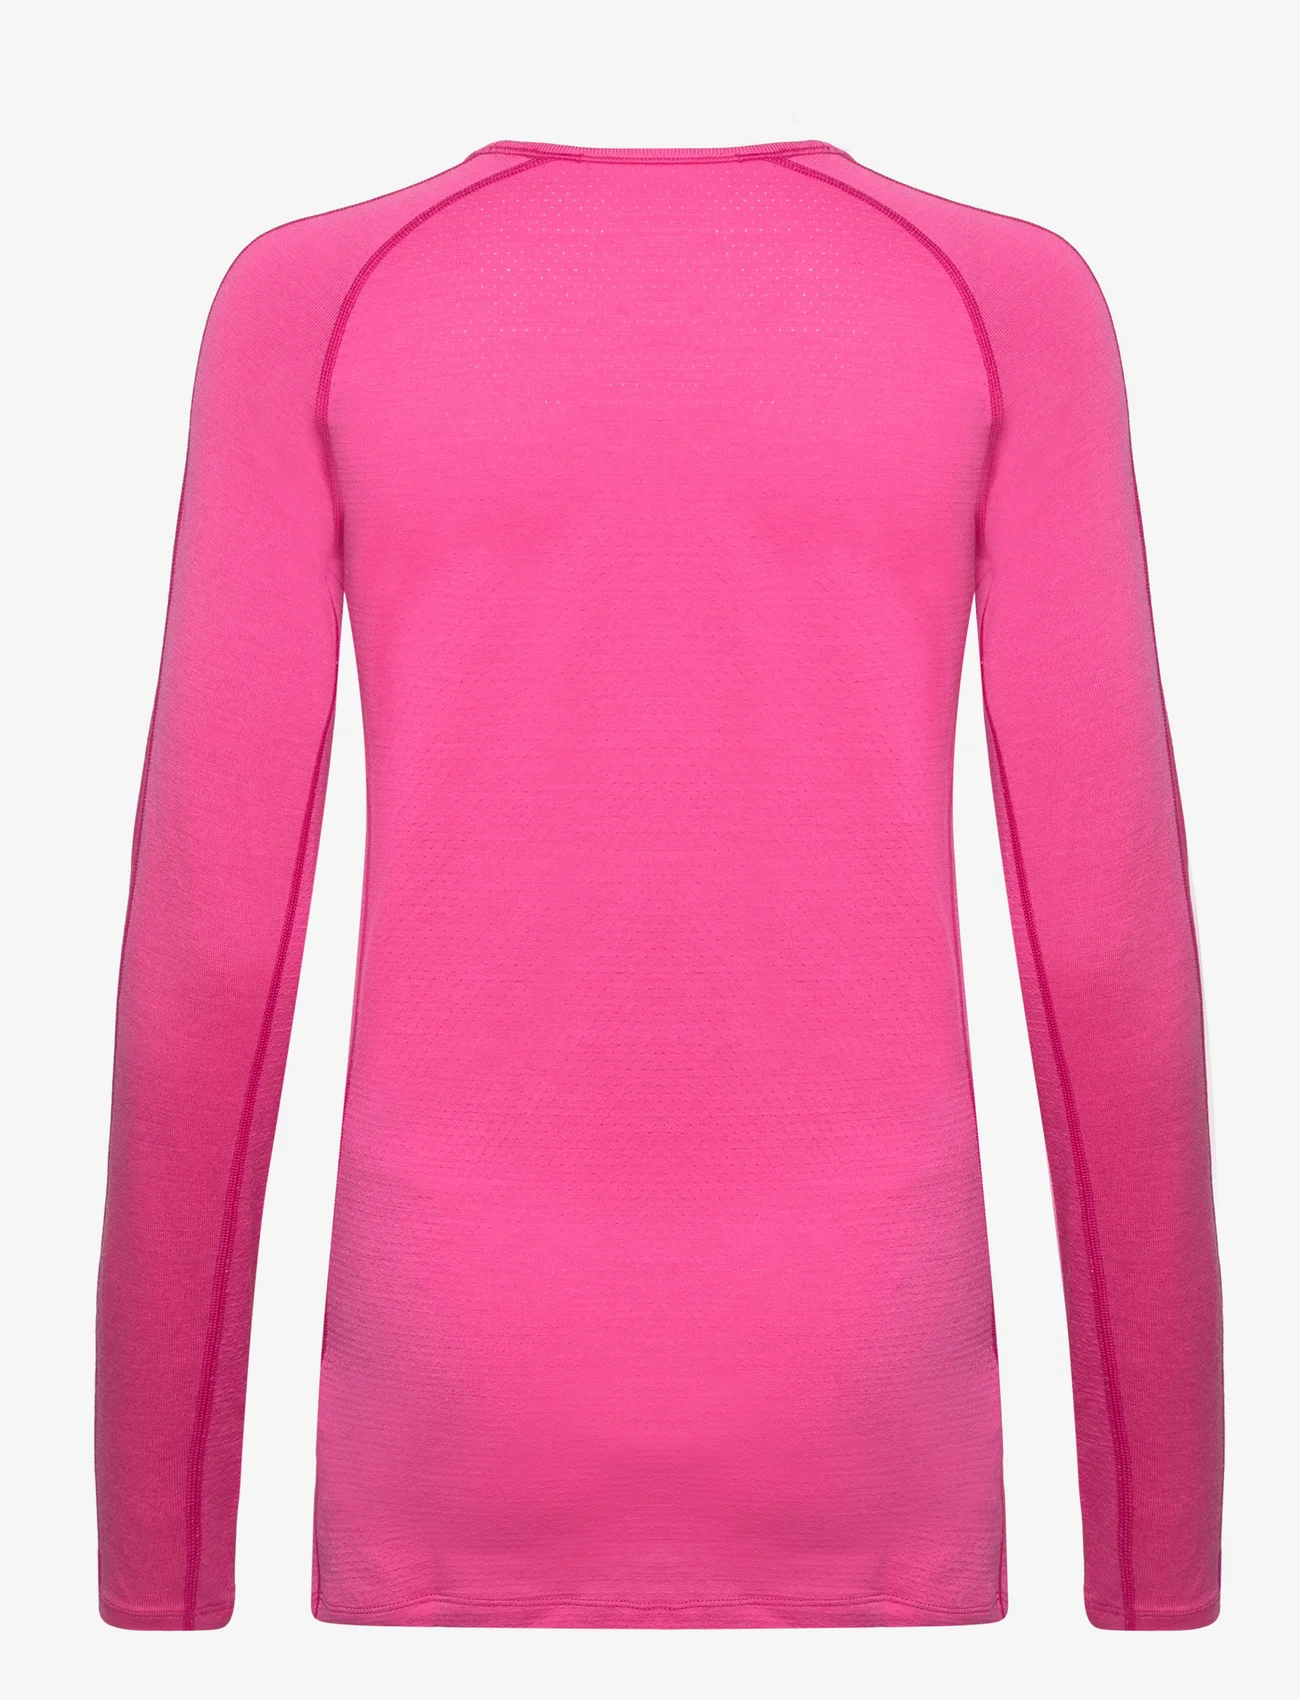 Icebreaker - W ZoneKnit 260 LS Crewe - base layer tops - tempo/electron pink/cb - 1